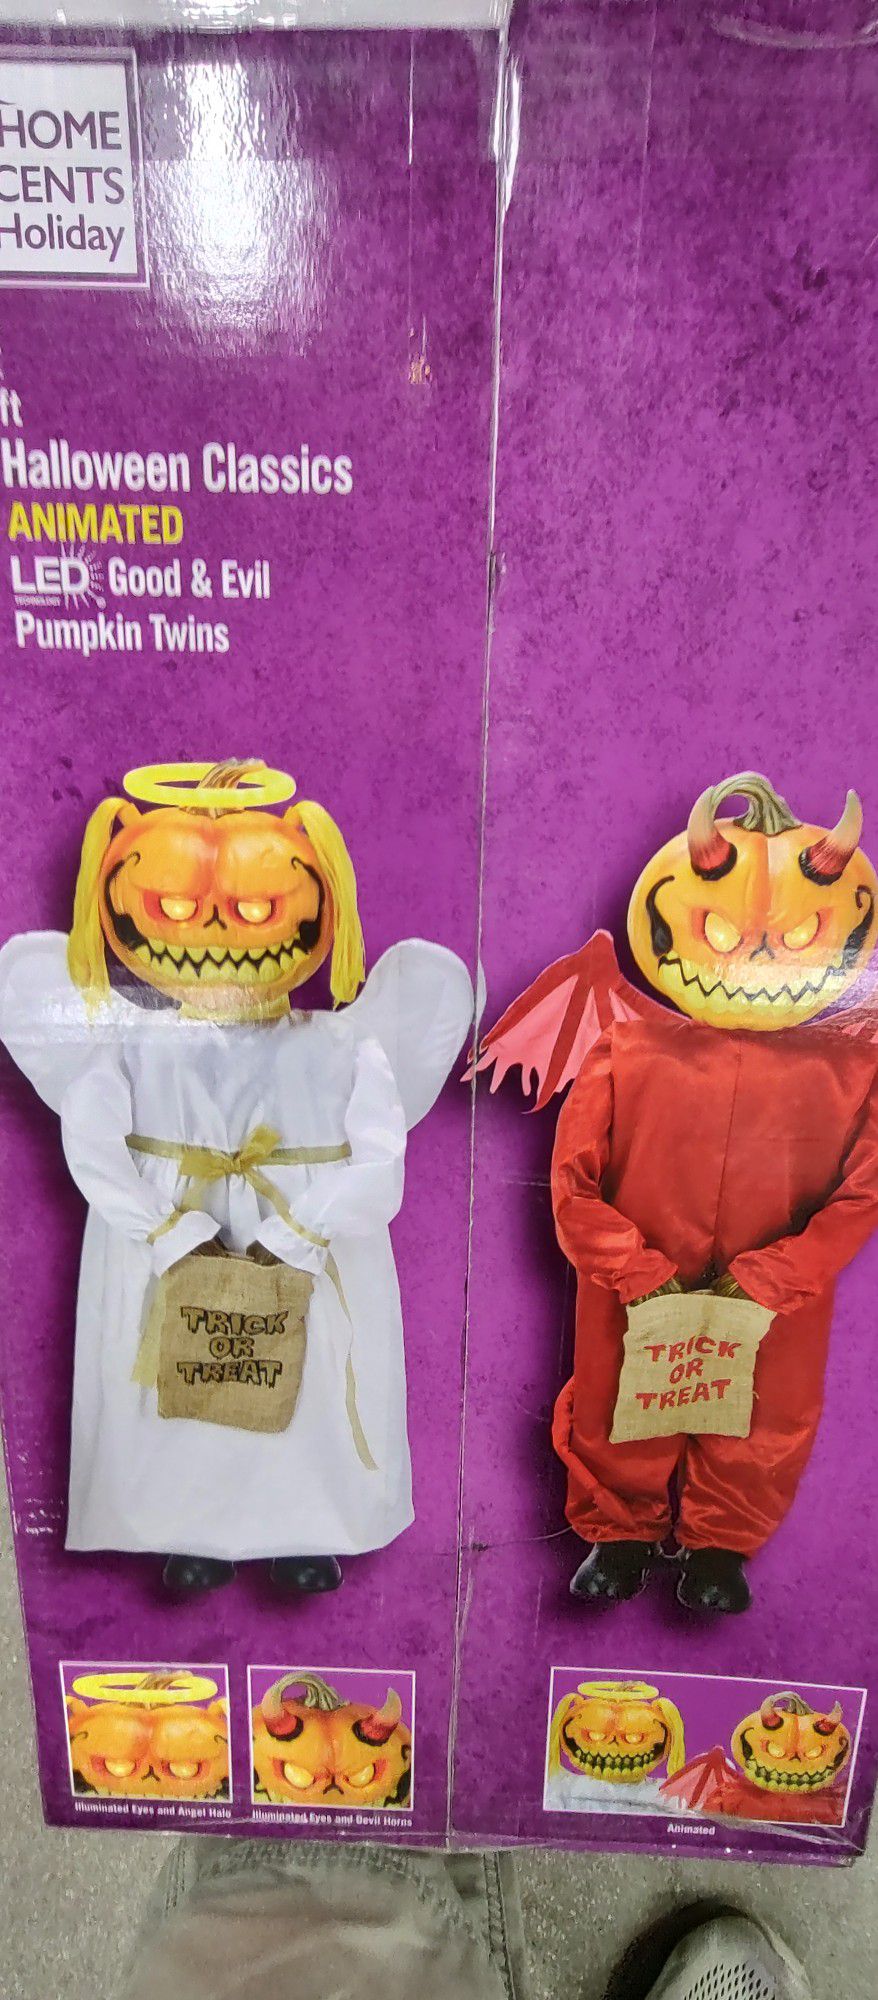 Halloween Animated Good And Evil Pumpkin Twins. Brand New In Box 